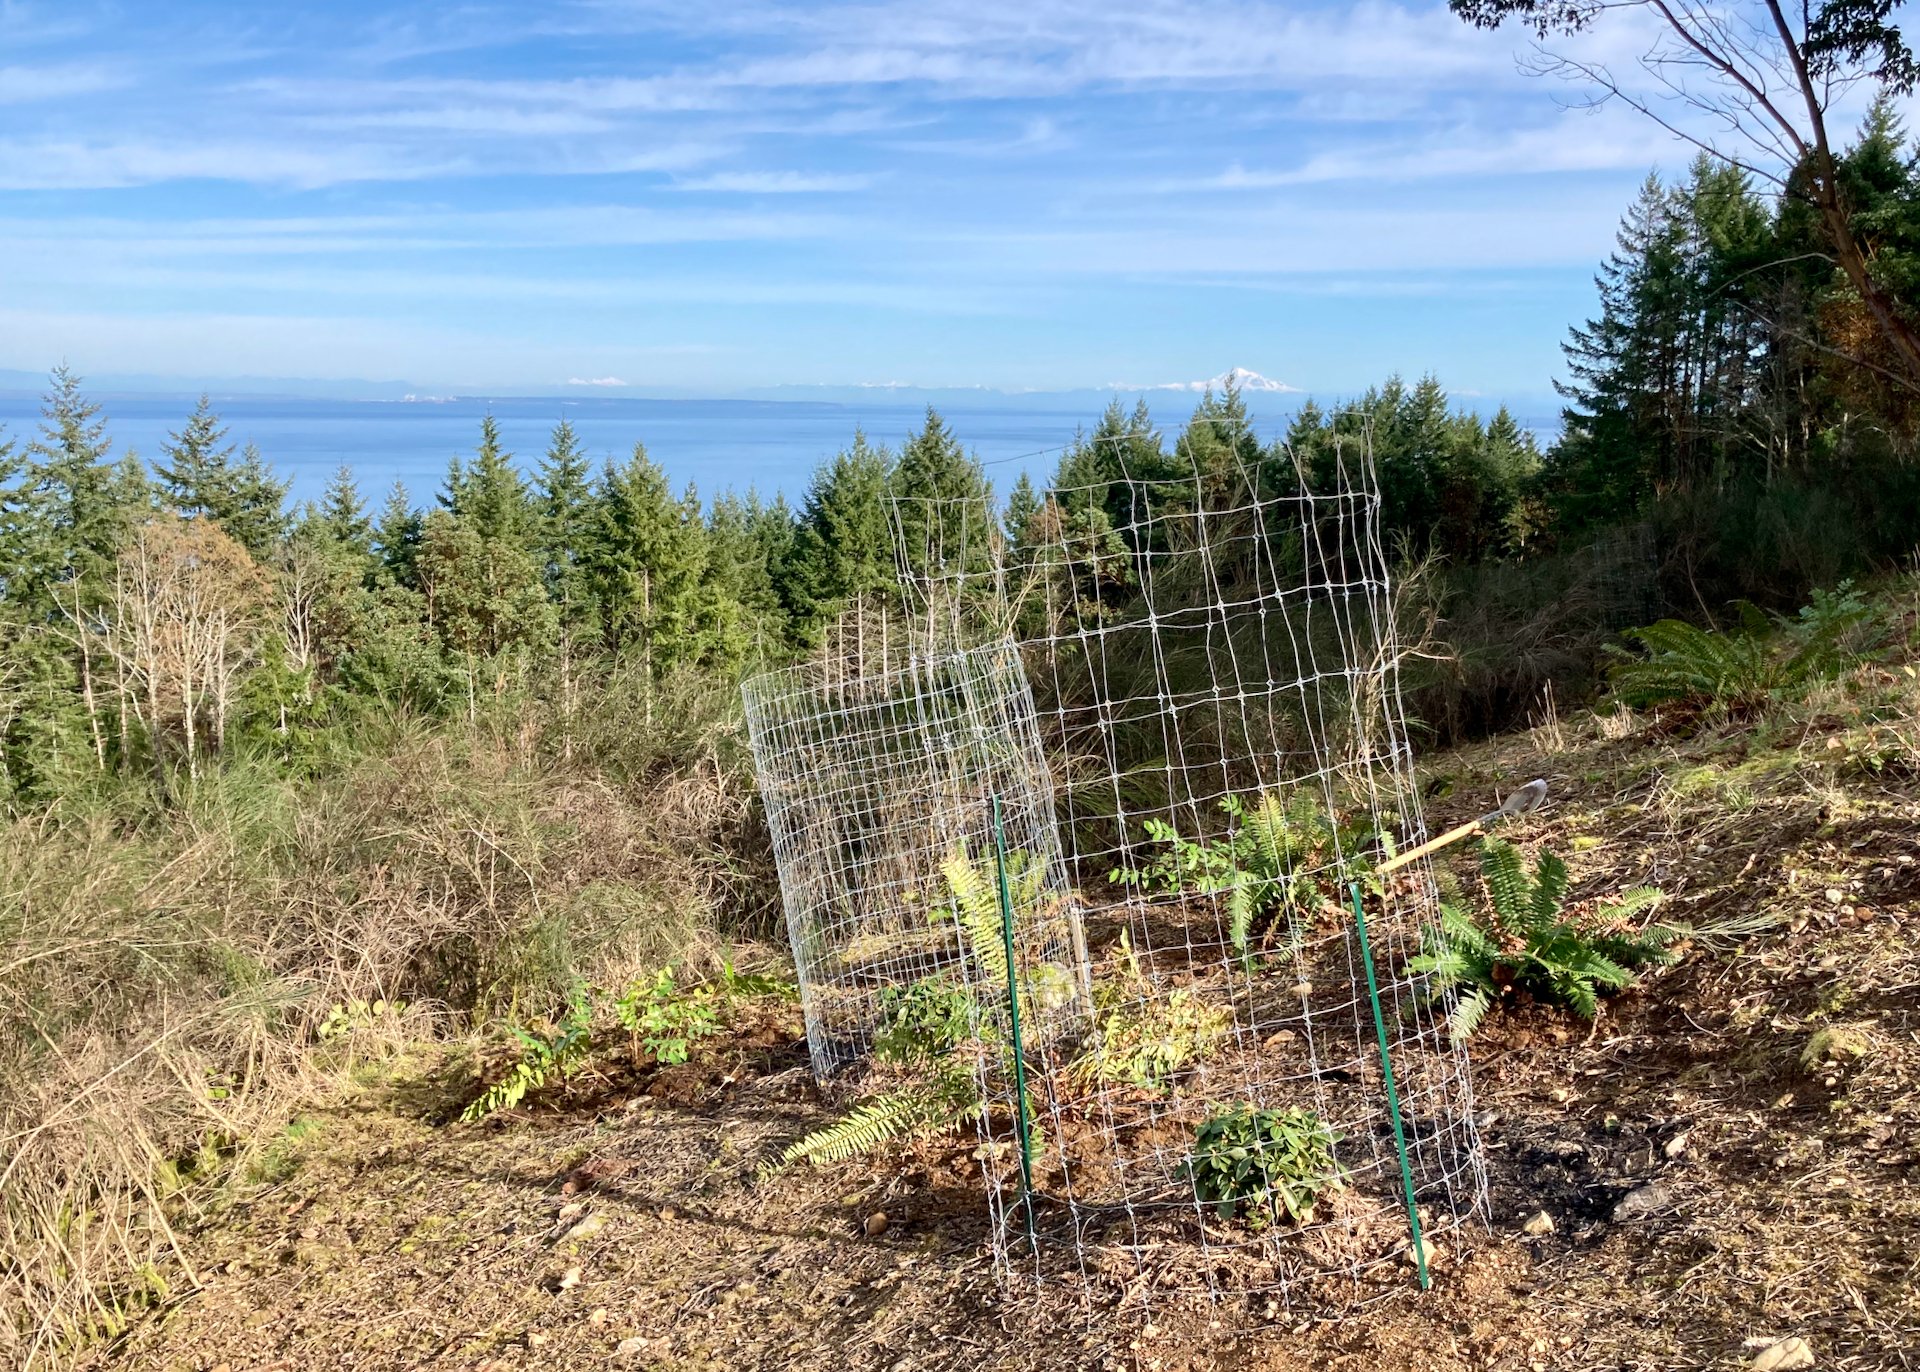  We planted a couple of rhododendrons with the hope that they’ll grow. BUt they need fencing to keep the deer from them.   